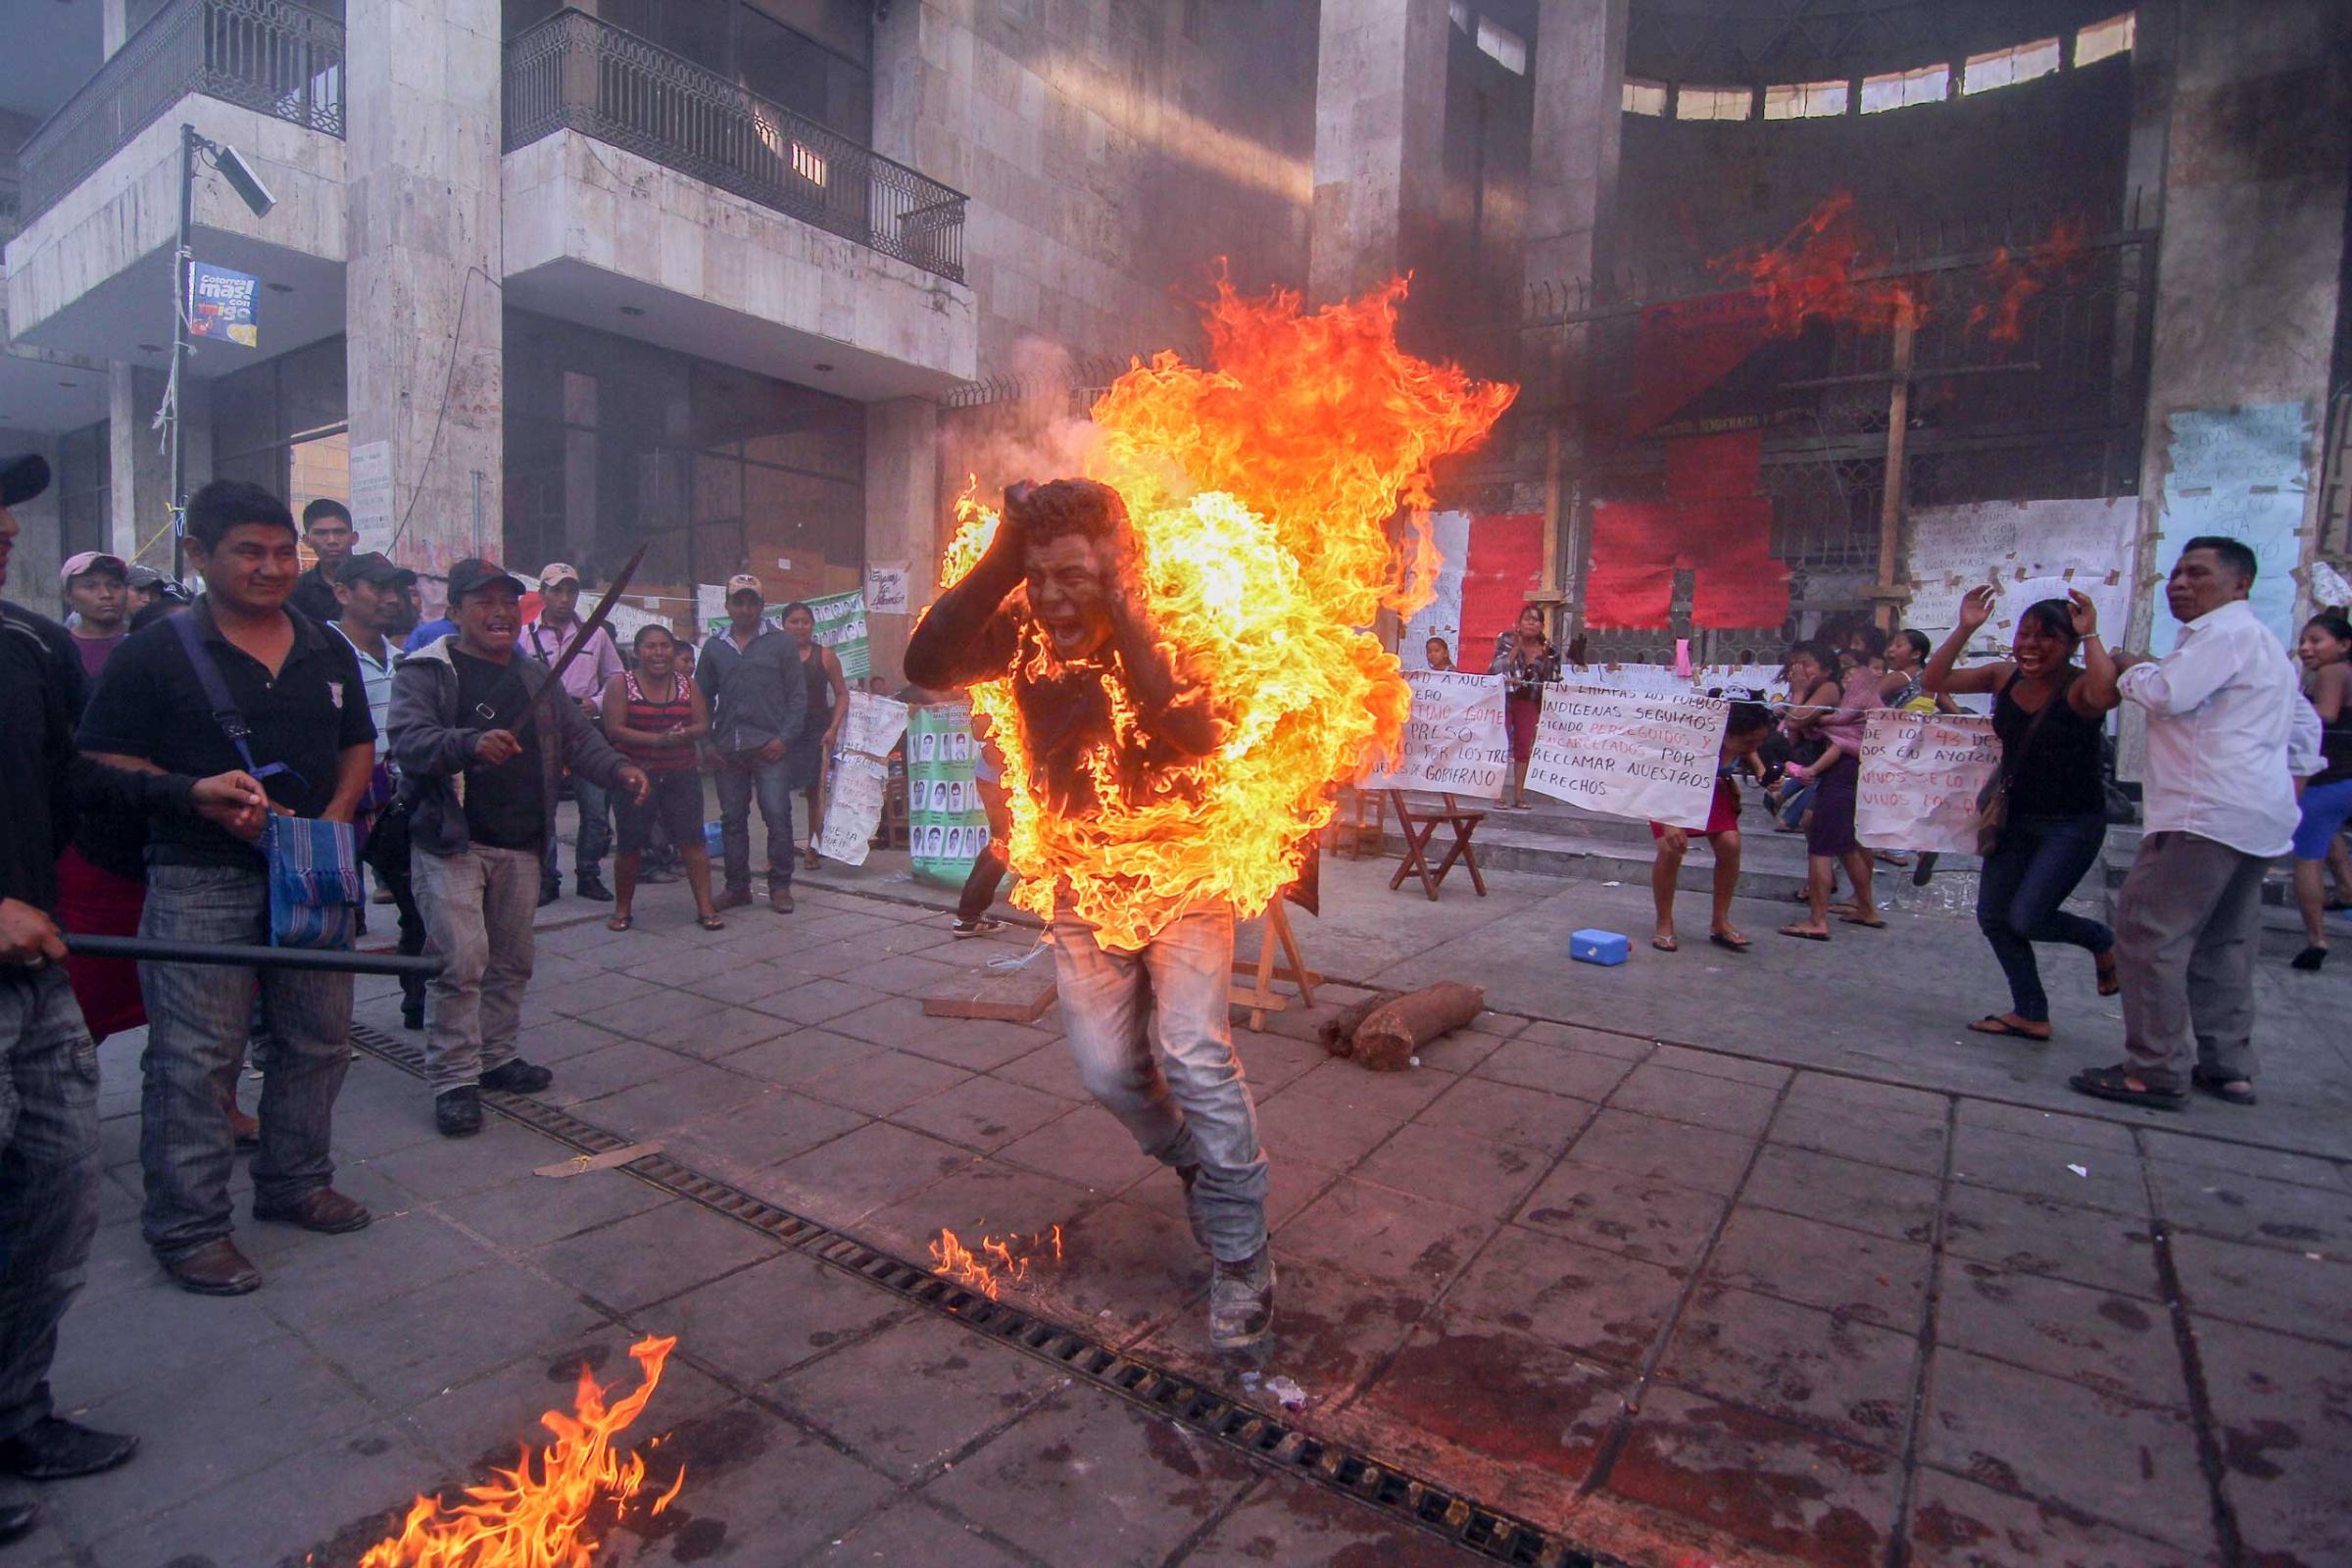 Farmer Agustin Gomez Perez, 21, runs engulfed in flames after he was lit on fire as a form of protest outside the Chiapas state legislature in Tuxtla Gutierrez, Mexico, Dec. 5, 2014. Perez was demanding the release of his father, indigenous leader Florentino Gomez Giron, who was arrested last year on charges stemming from a series of demonstrations in 2011 that turned violent.